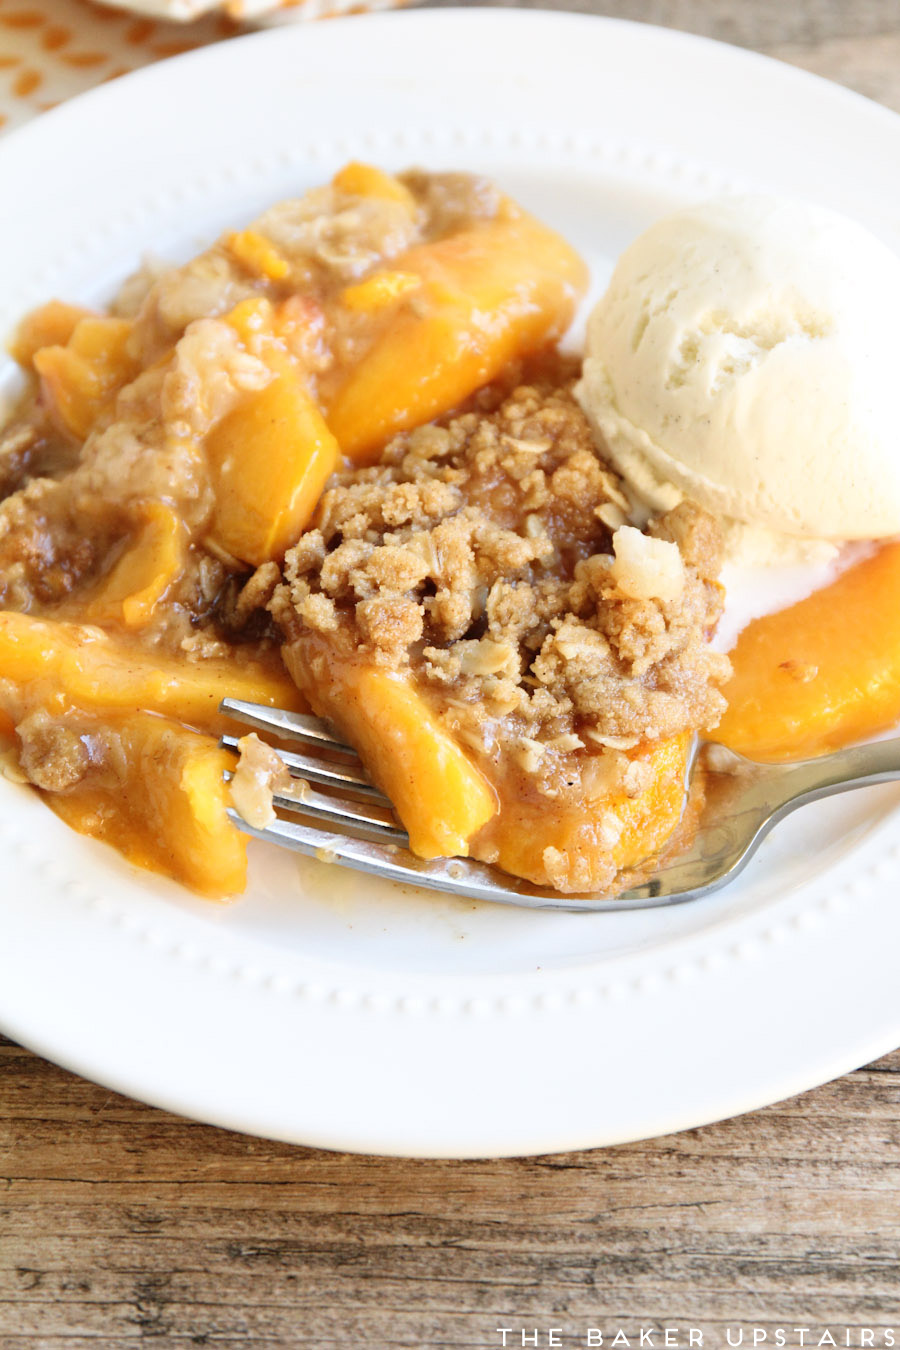 11 Sweet Peach Recipes - These peach recipes are perfect for all of your juicy summer fruit, and are simply delicious!